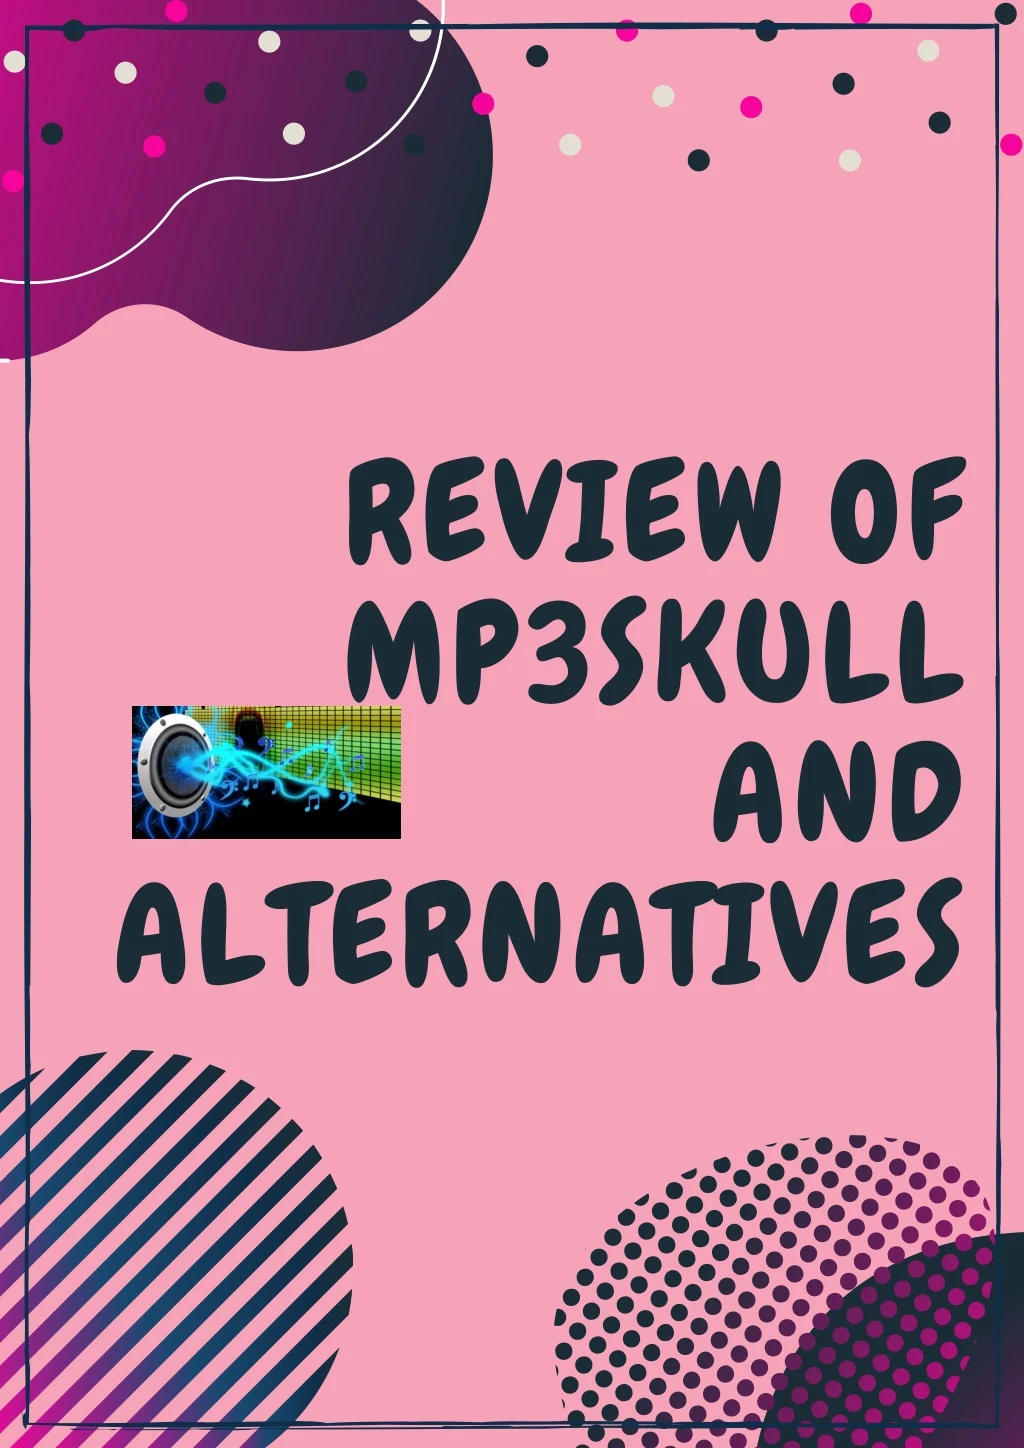 review of mp3skull